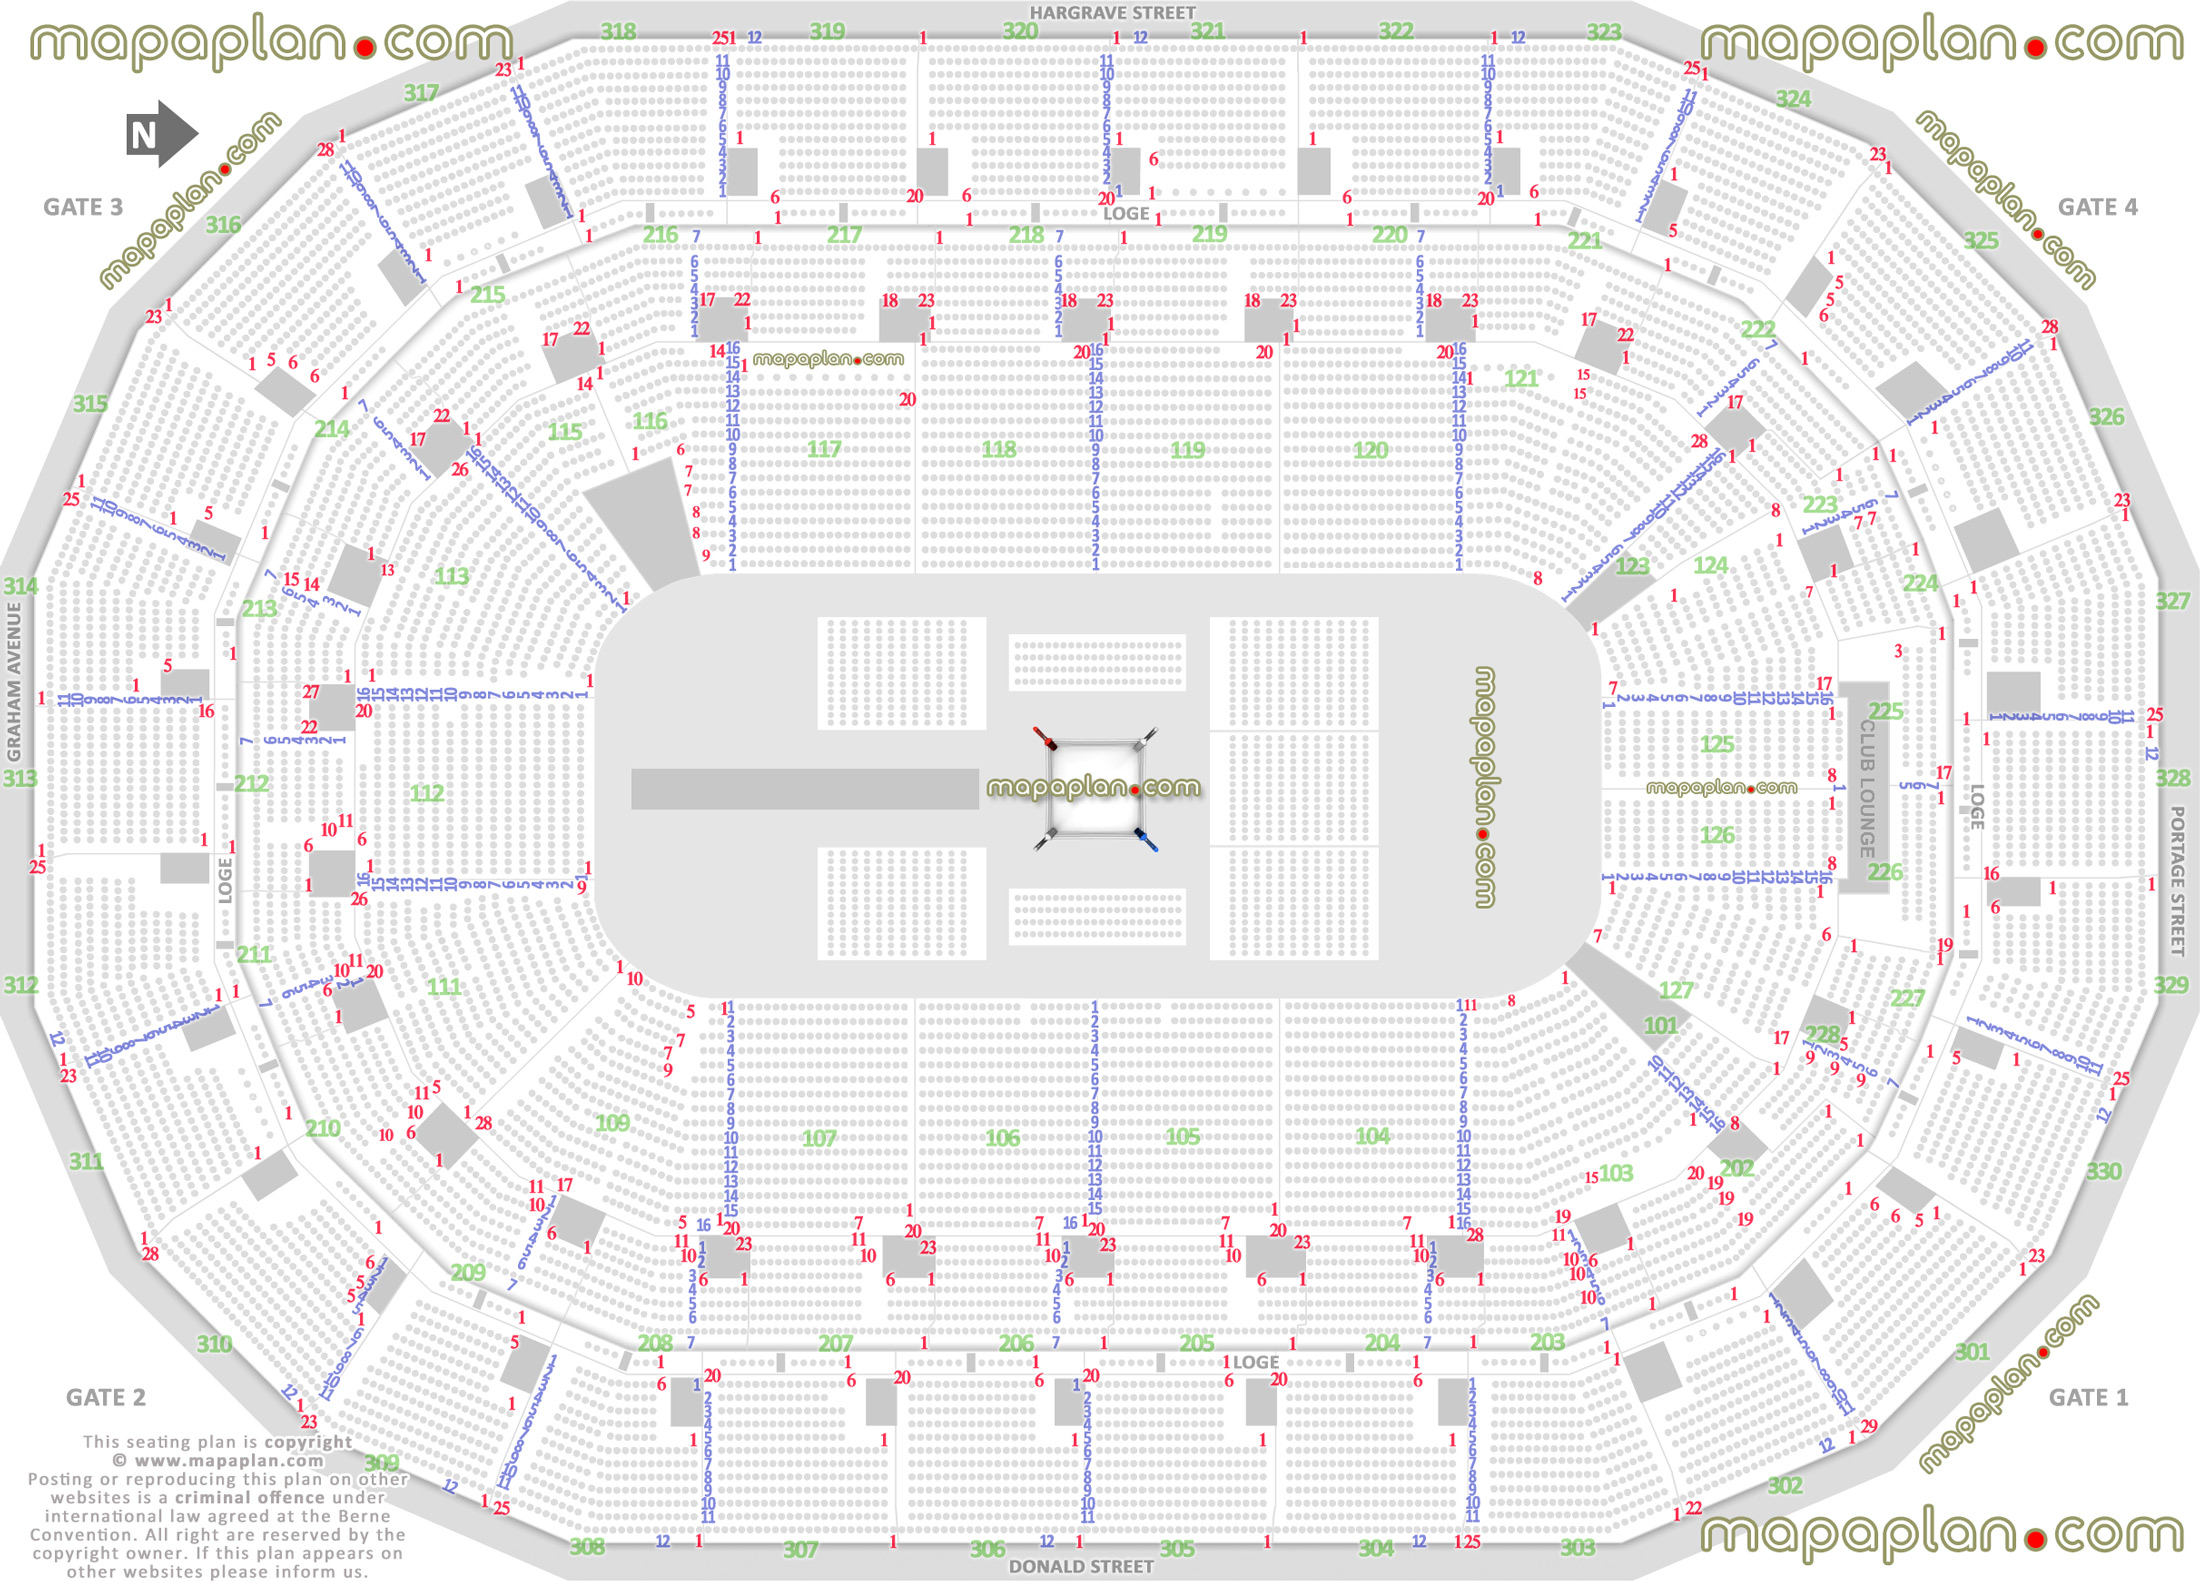 wwe wrestling boxing match events map row 360 round ring floor configuration how many rows sections 101 103 104 105 106 107 109 111 112 113 115 116 117 118 119 120 121 123 124 125 126 127 Winnipeg Canada Life Centre seating chart